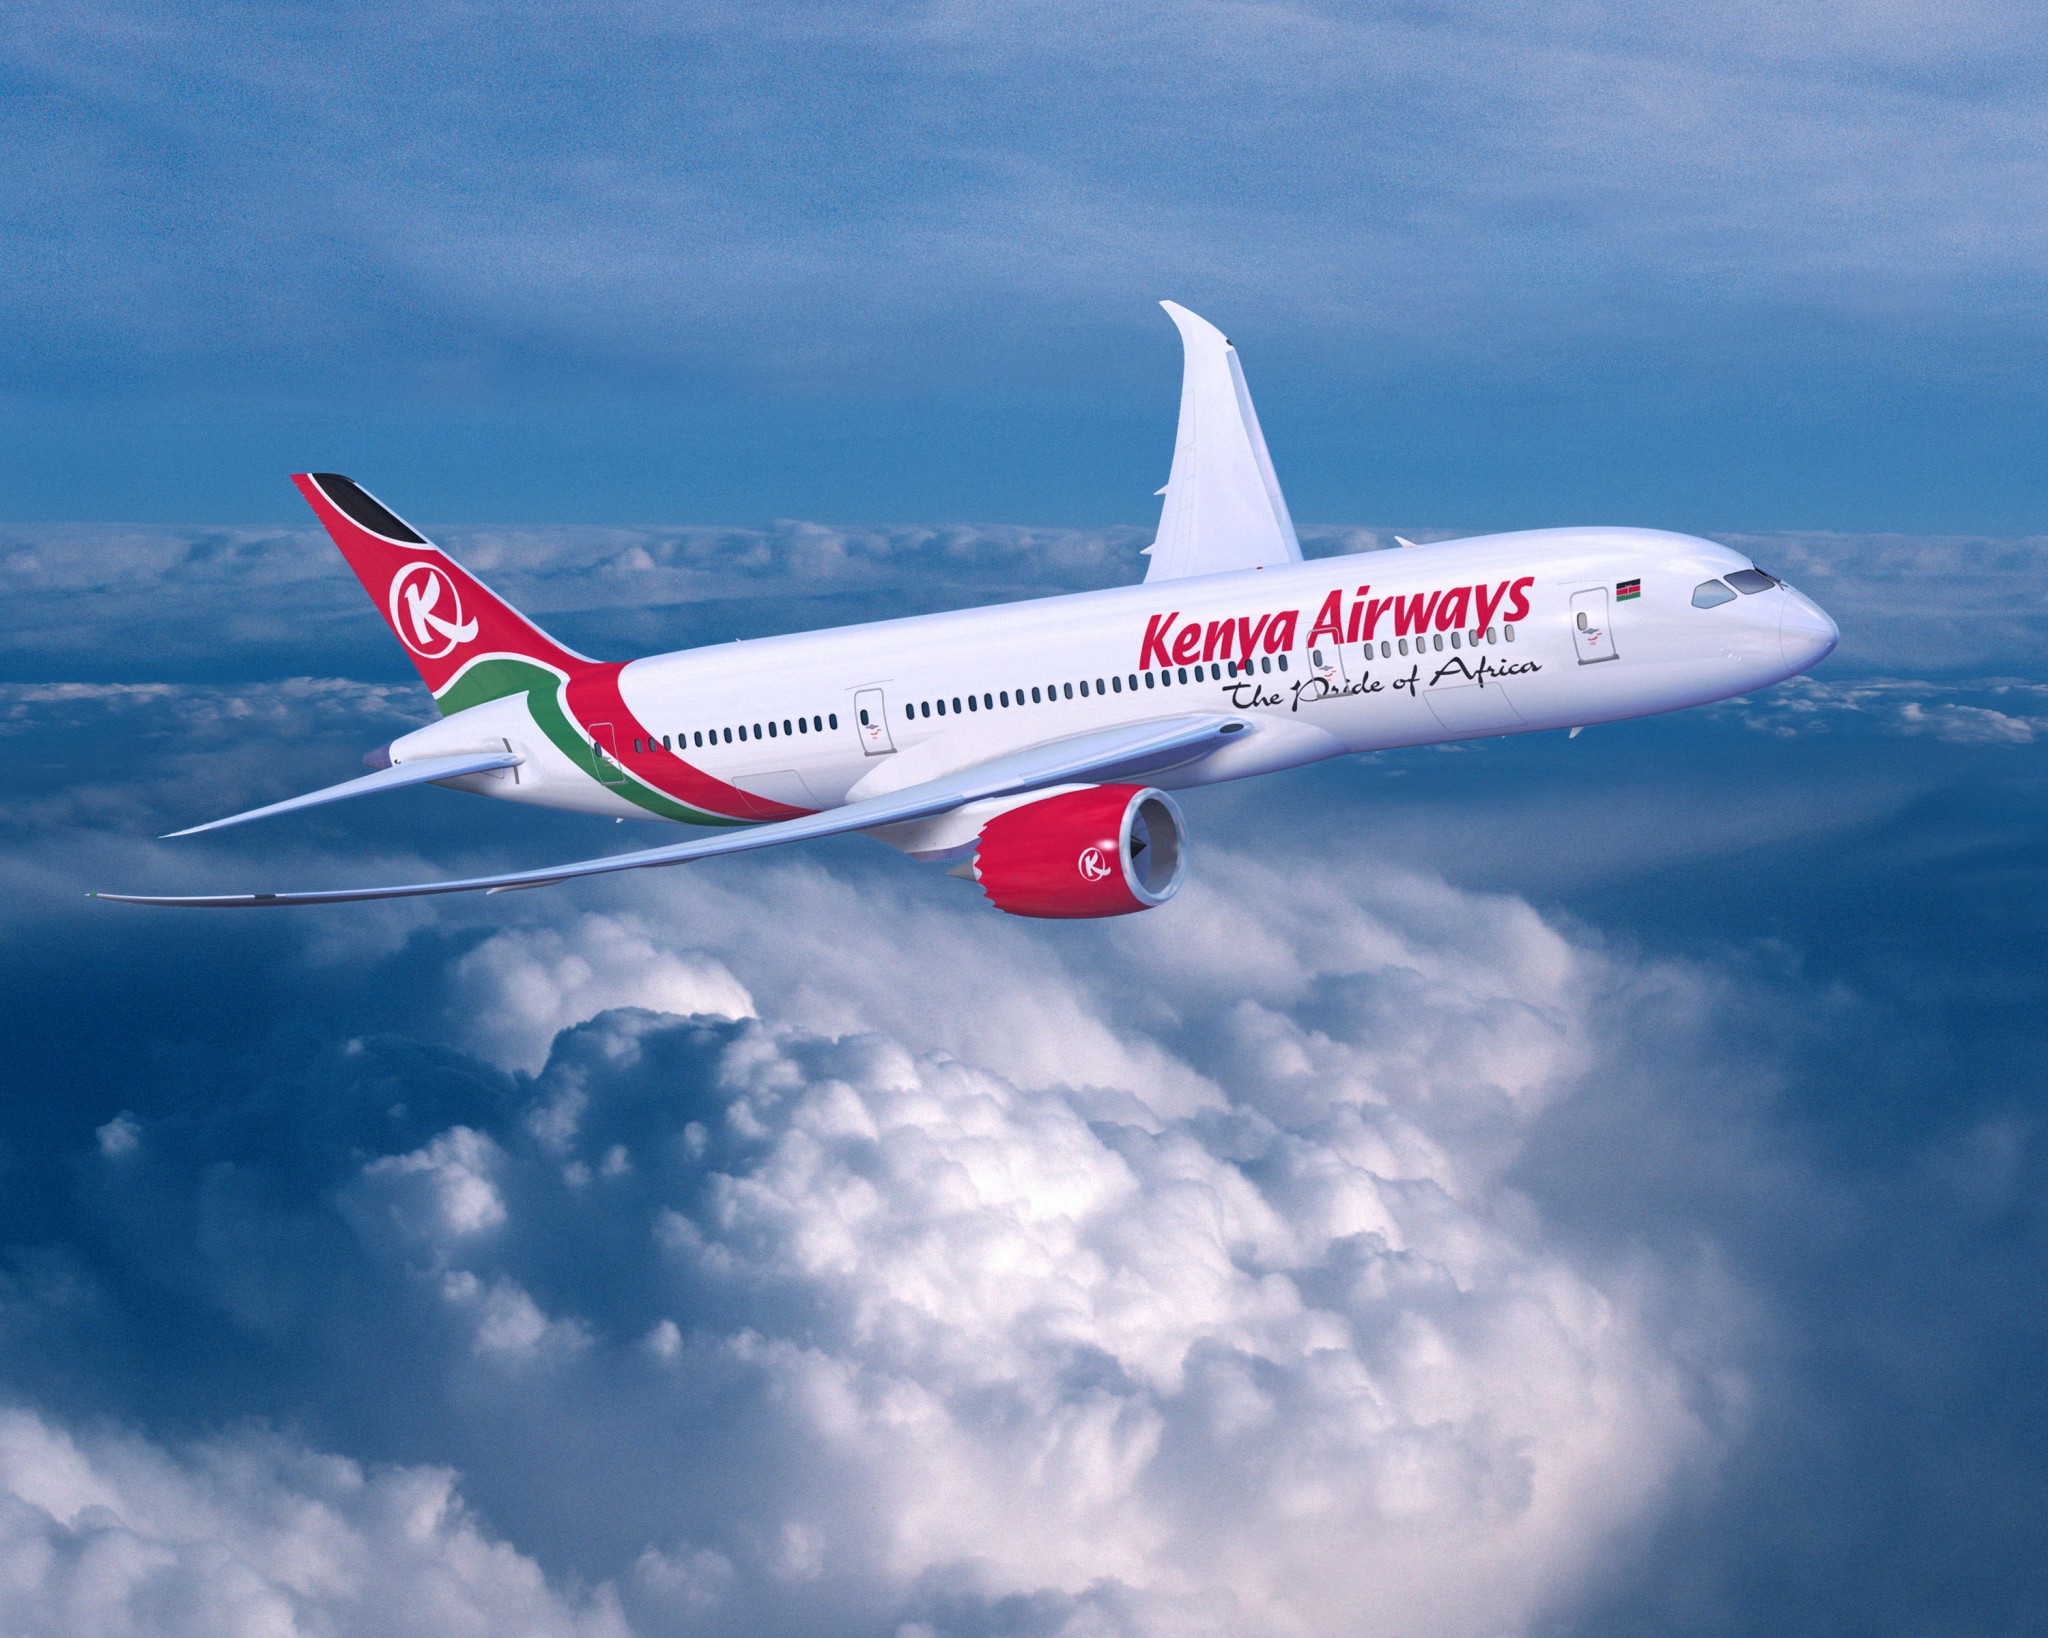 Kenya and SAA to form new pan-African airline